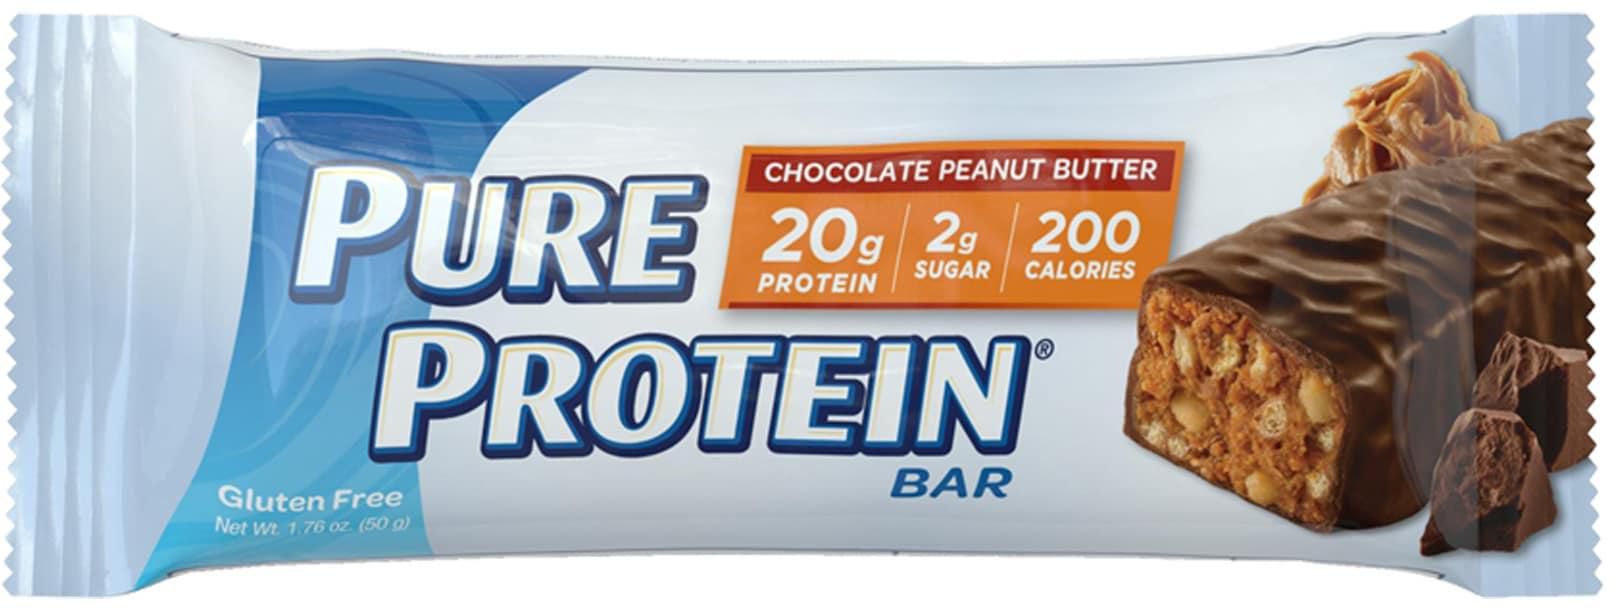 Pure Chocolate Peanut Butter Protein Bar 50g